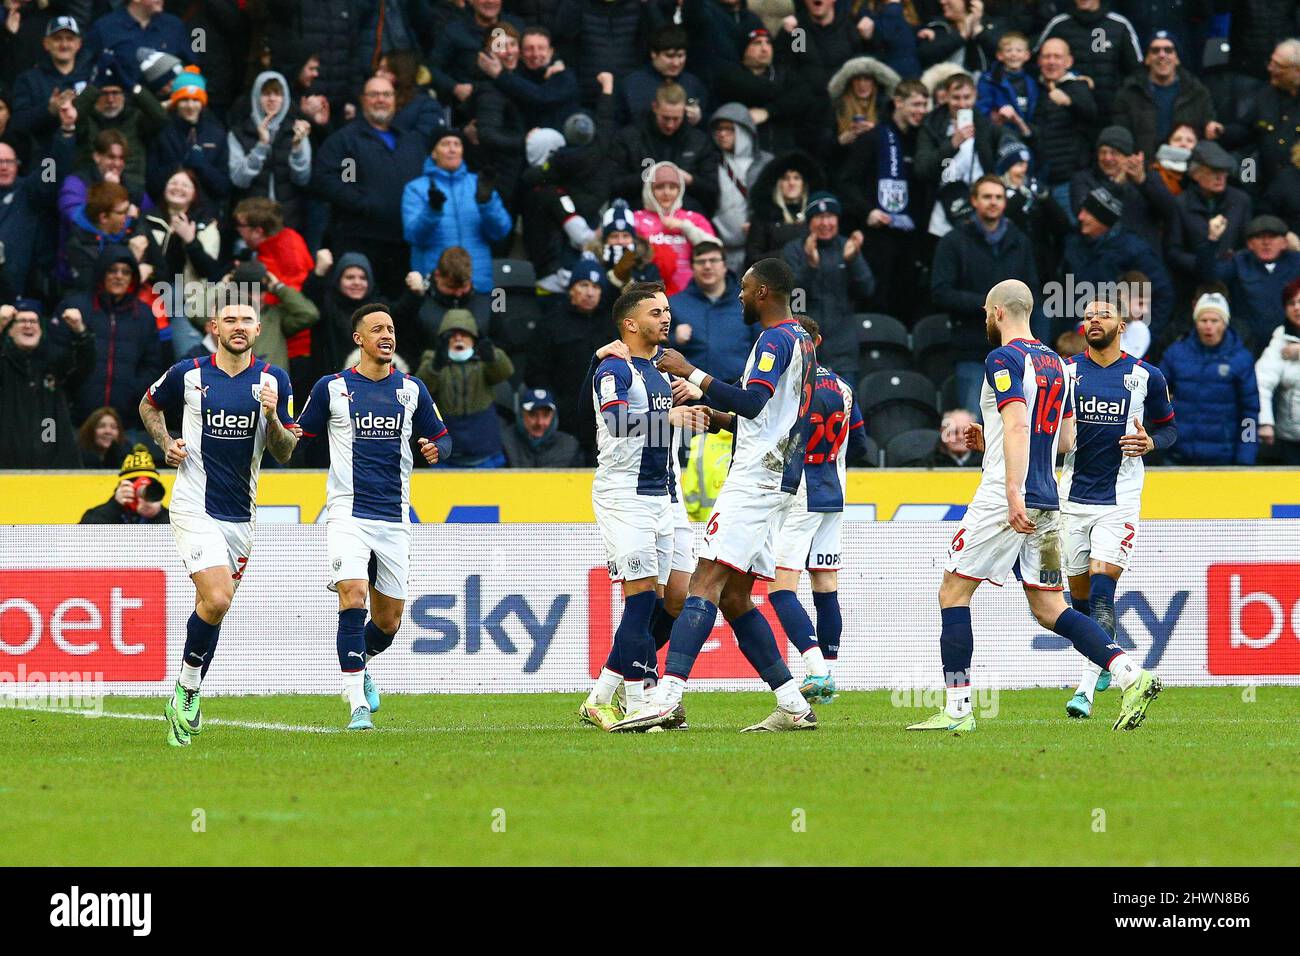 MKM Stadium, Hull, England - 5th March 2022  West Brom players mob Karlan Grant (middle) after he made it  0 - 2  during the game Hull City v West Bromwich Albion, EFL Championship 2021/22 MKM Stadium, Hull, England - 5th March 2022   Credit: Arthur Haigh/WhiteRosePhotos/Alamy Live News Stock Photo